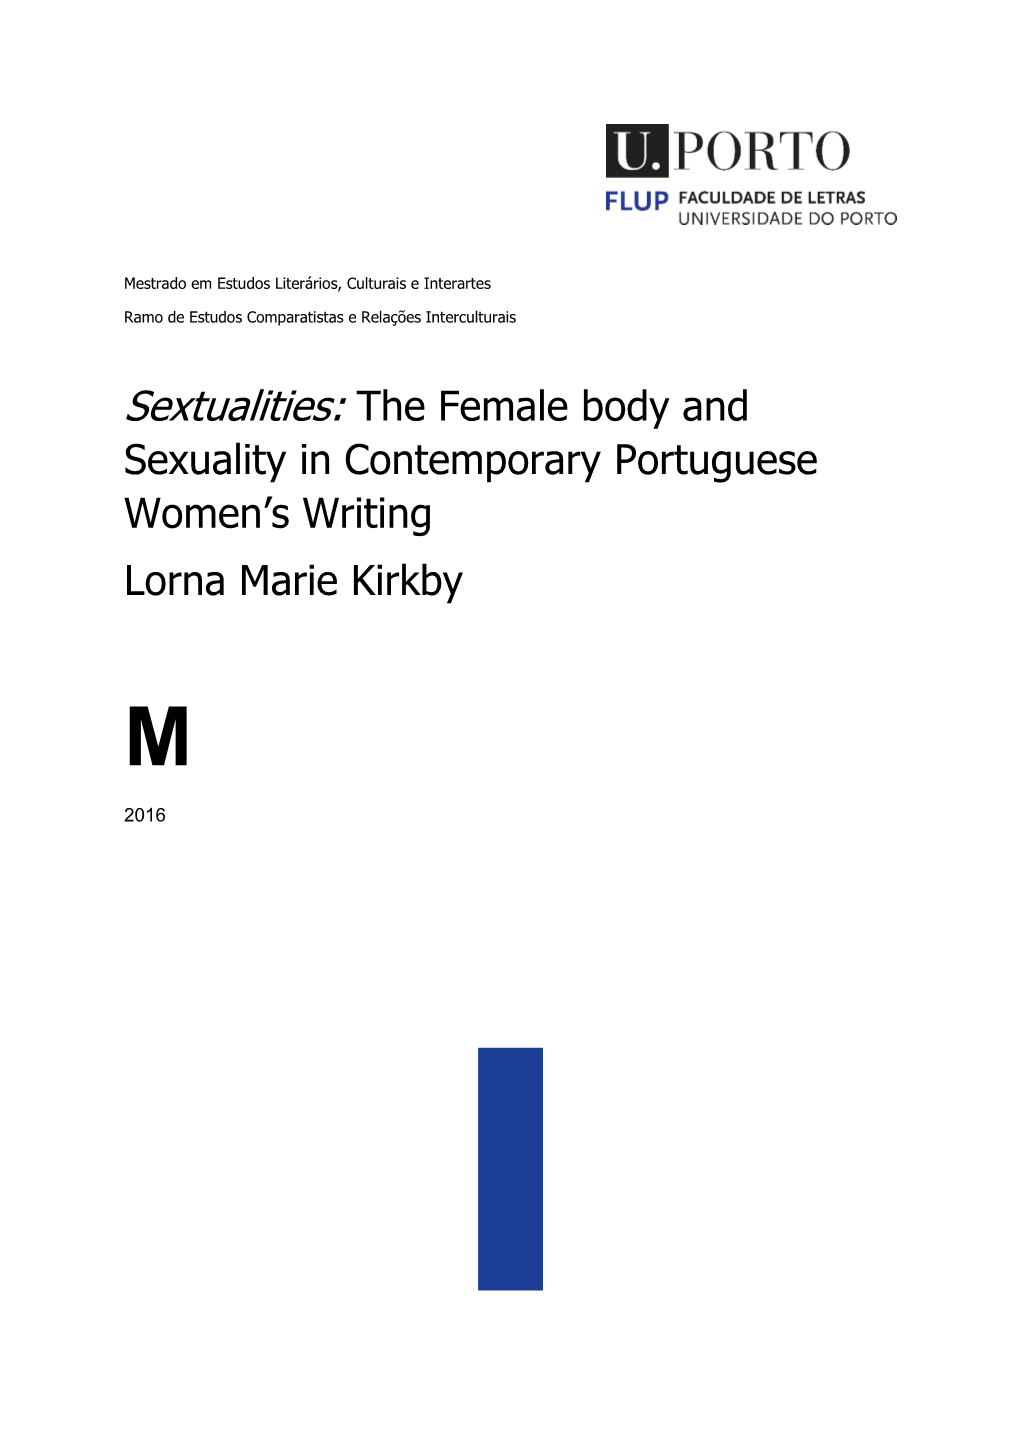 The Body and Sexuality in the Portuguese Women's Writing